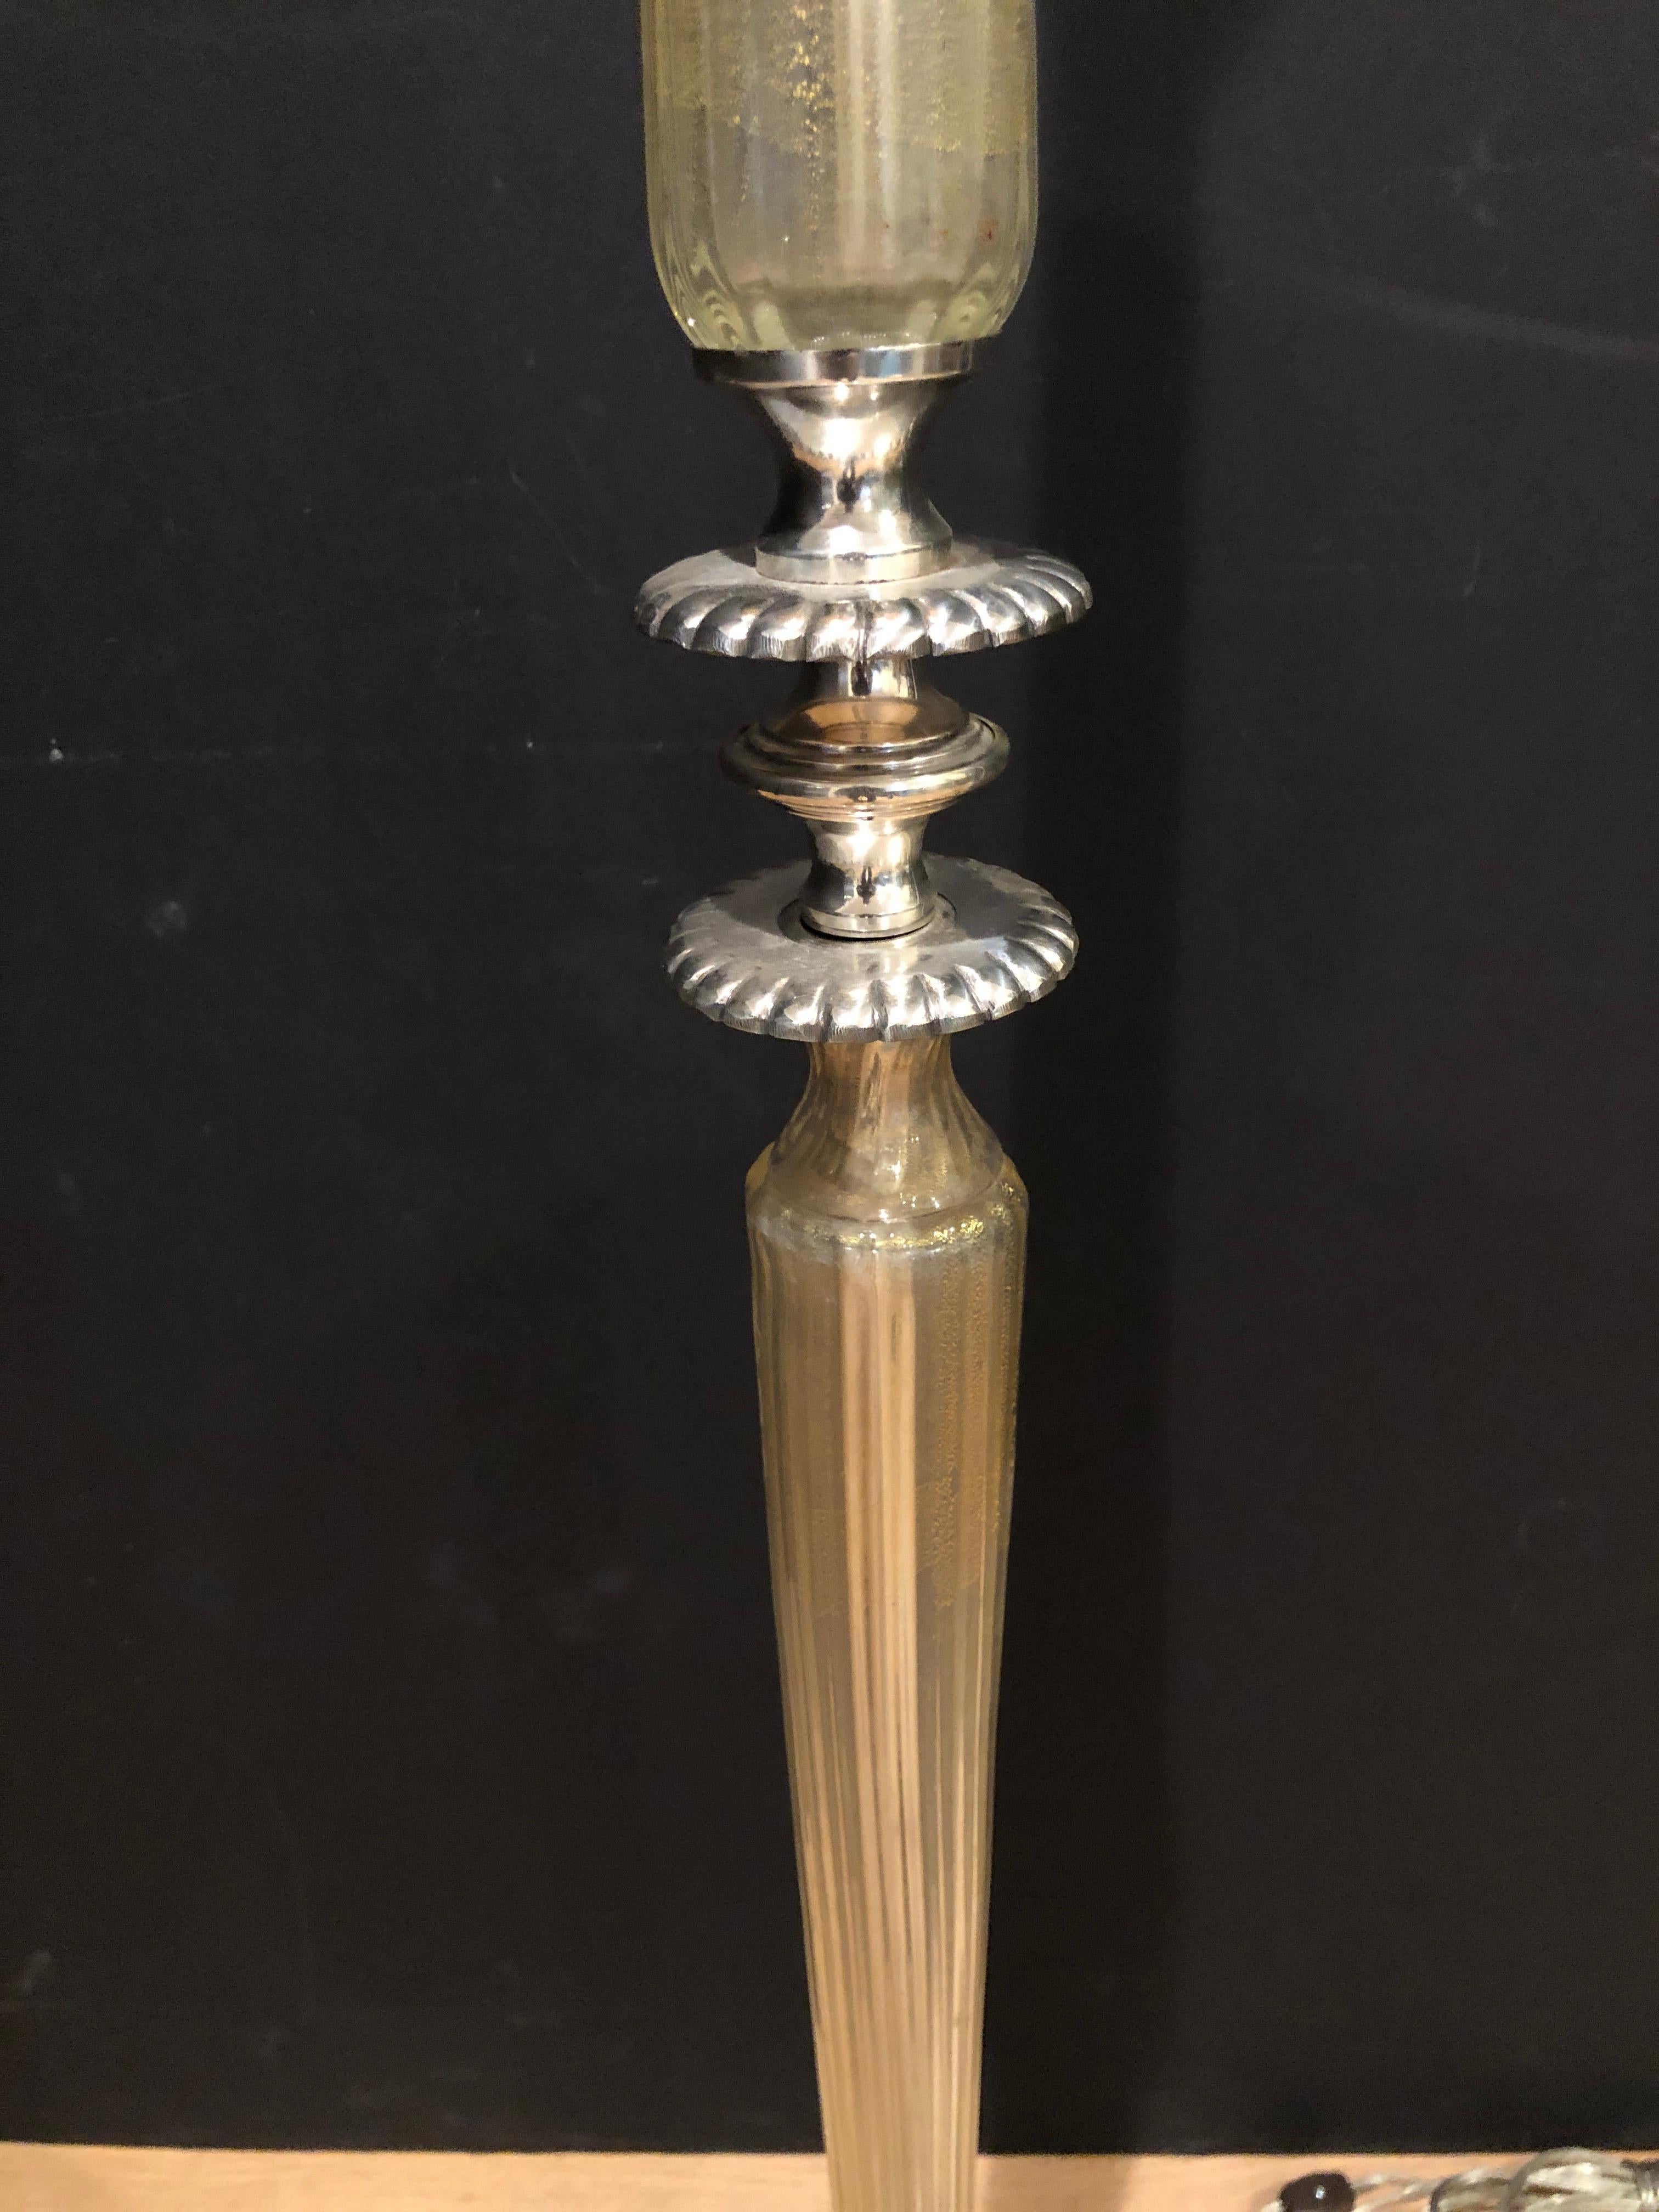 Murano glass midcentury torchiere floor lamp with silvered bronze legs and decorative elements. Hand blown fluted glass columns with gold flecks. Original torchere shade from spun aluminum.